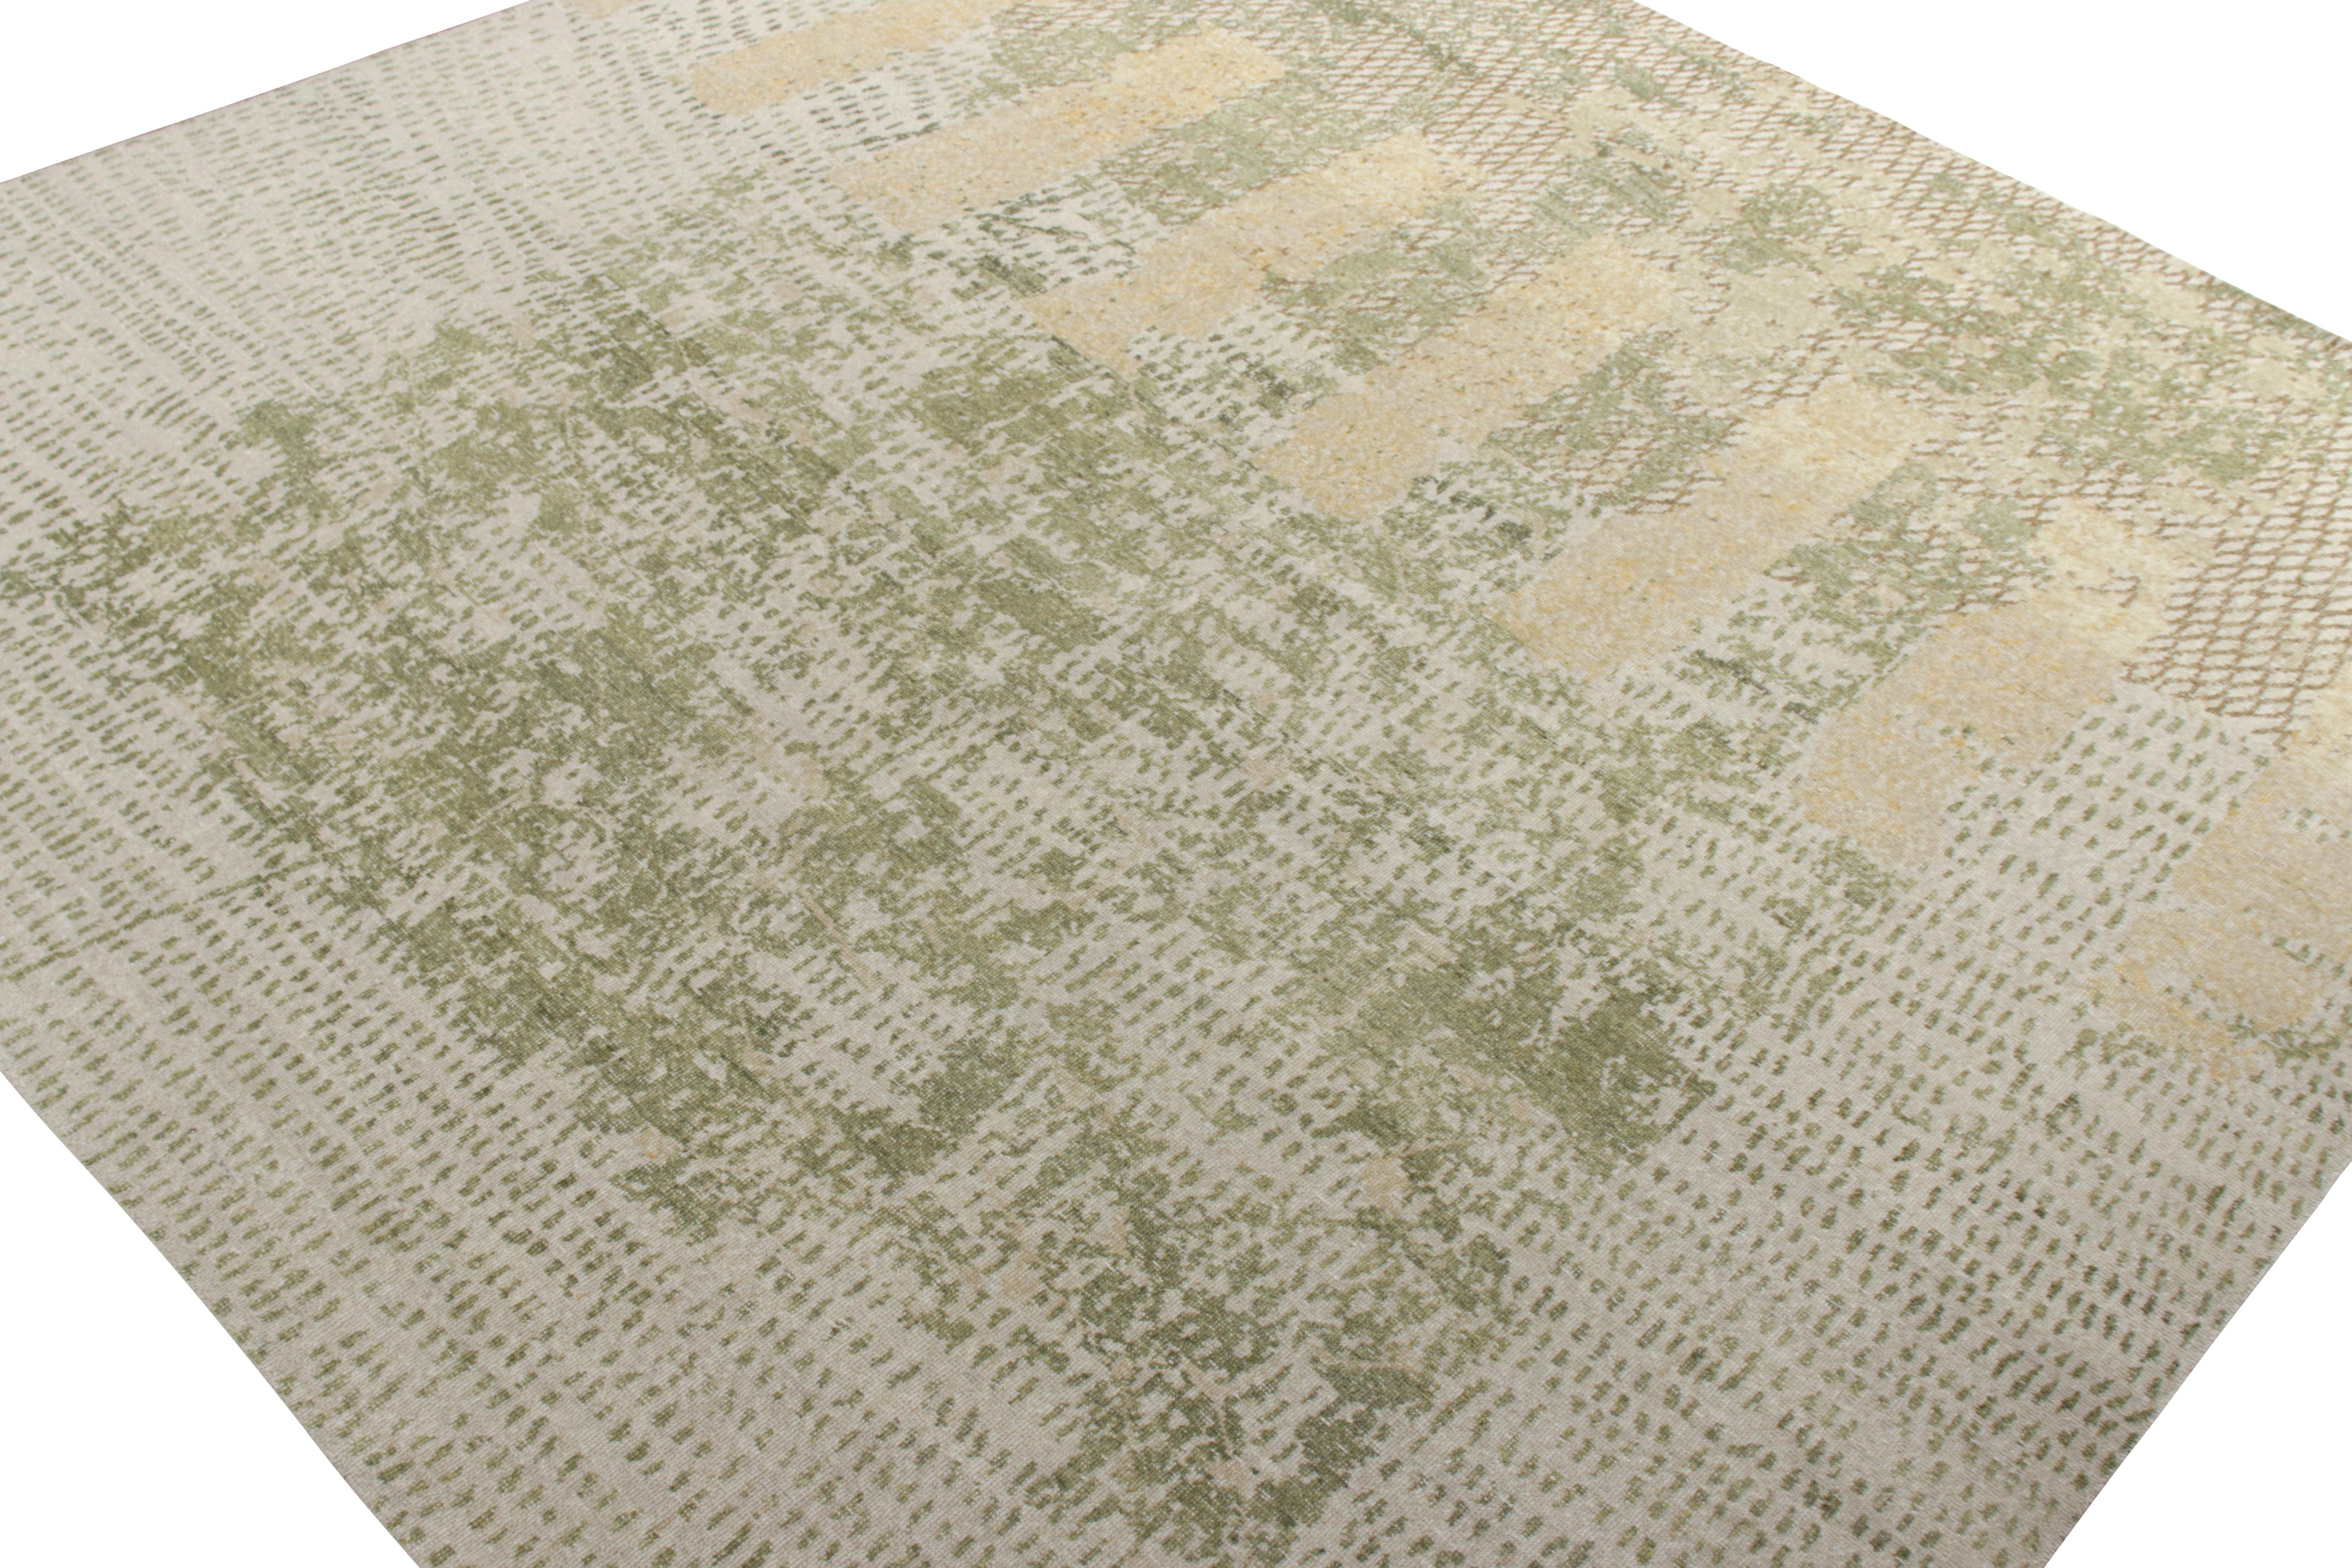 A 12X12 hand-knotted piece from Rug & Kilim’s Homage Collection. Donning a modern vibe, this piece is a crowning glory from our Dots Line. The rug features an abstract pattern in a dotted theme with a welcoming green, beige-brown, and gray abstract